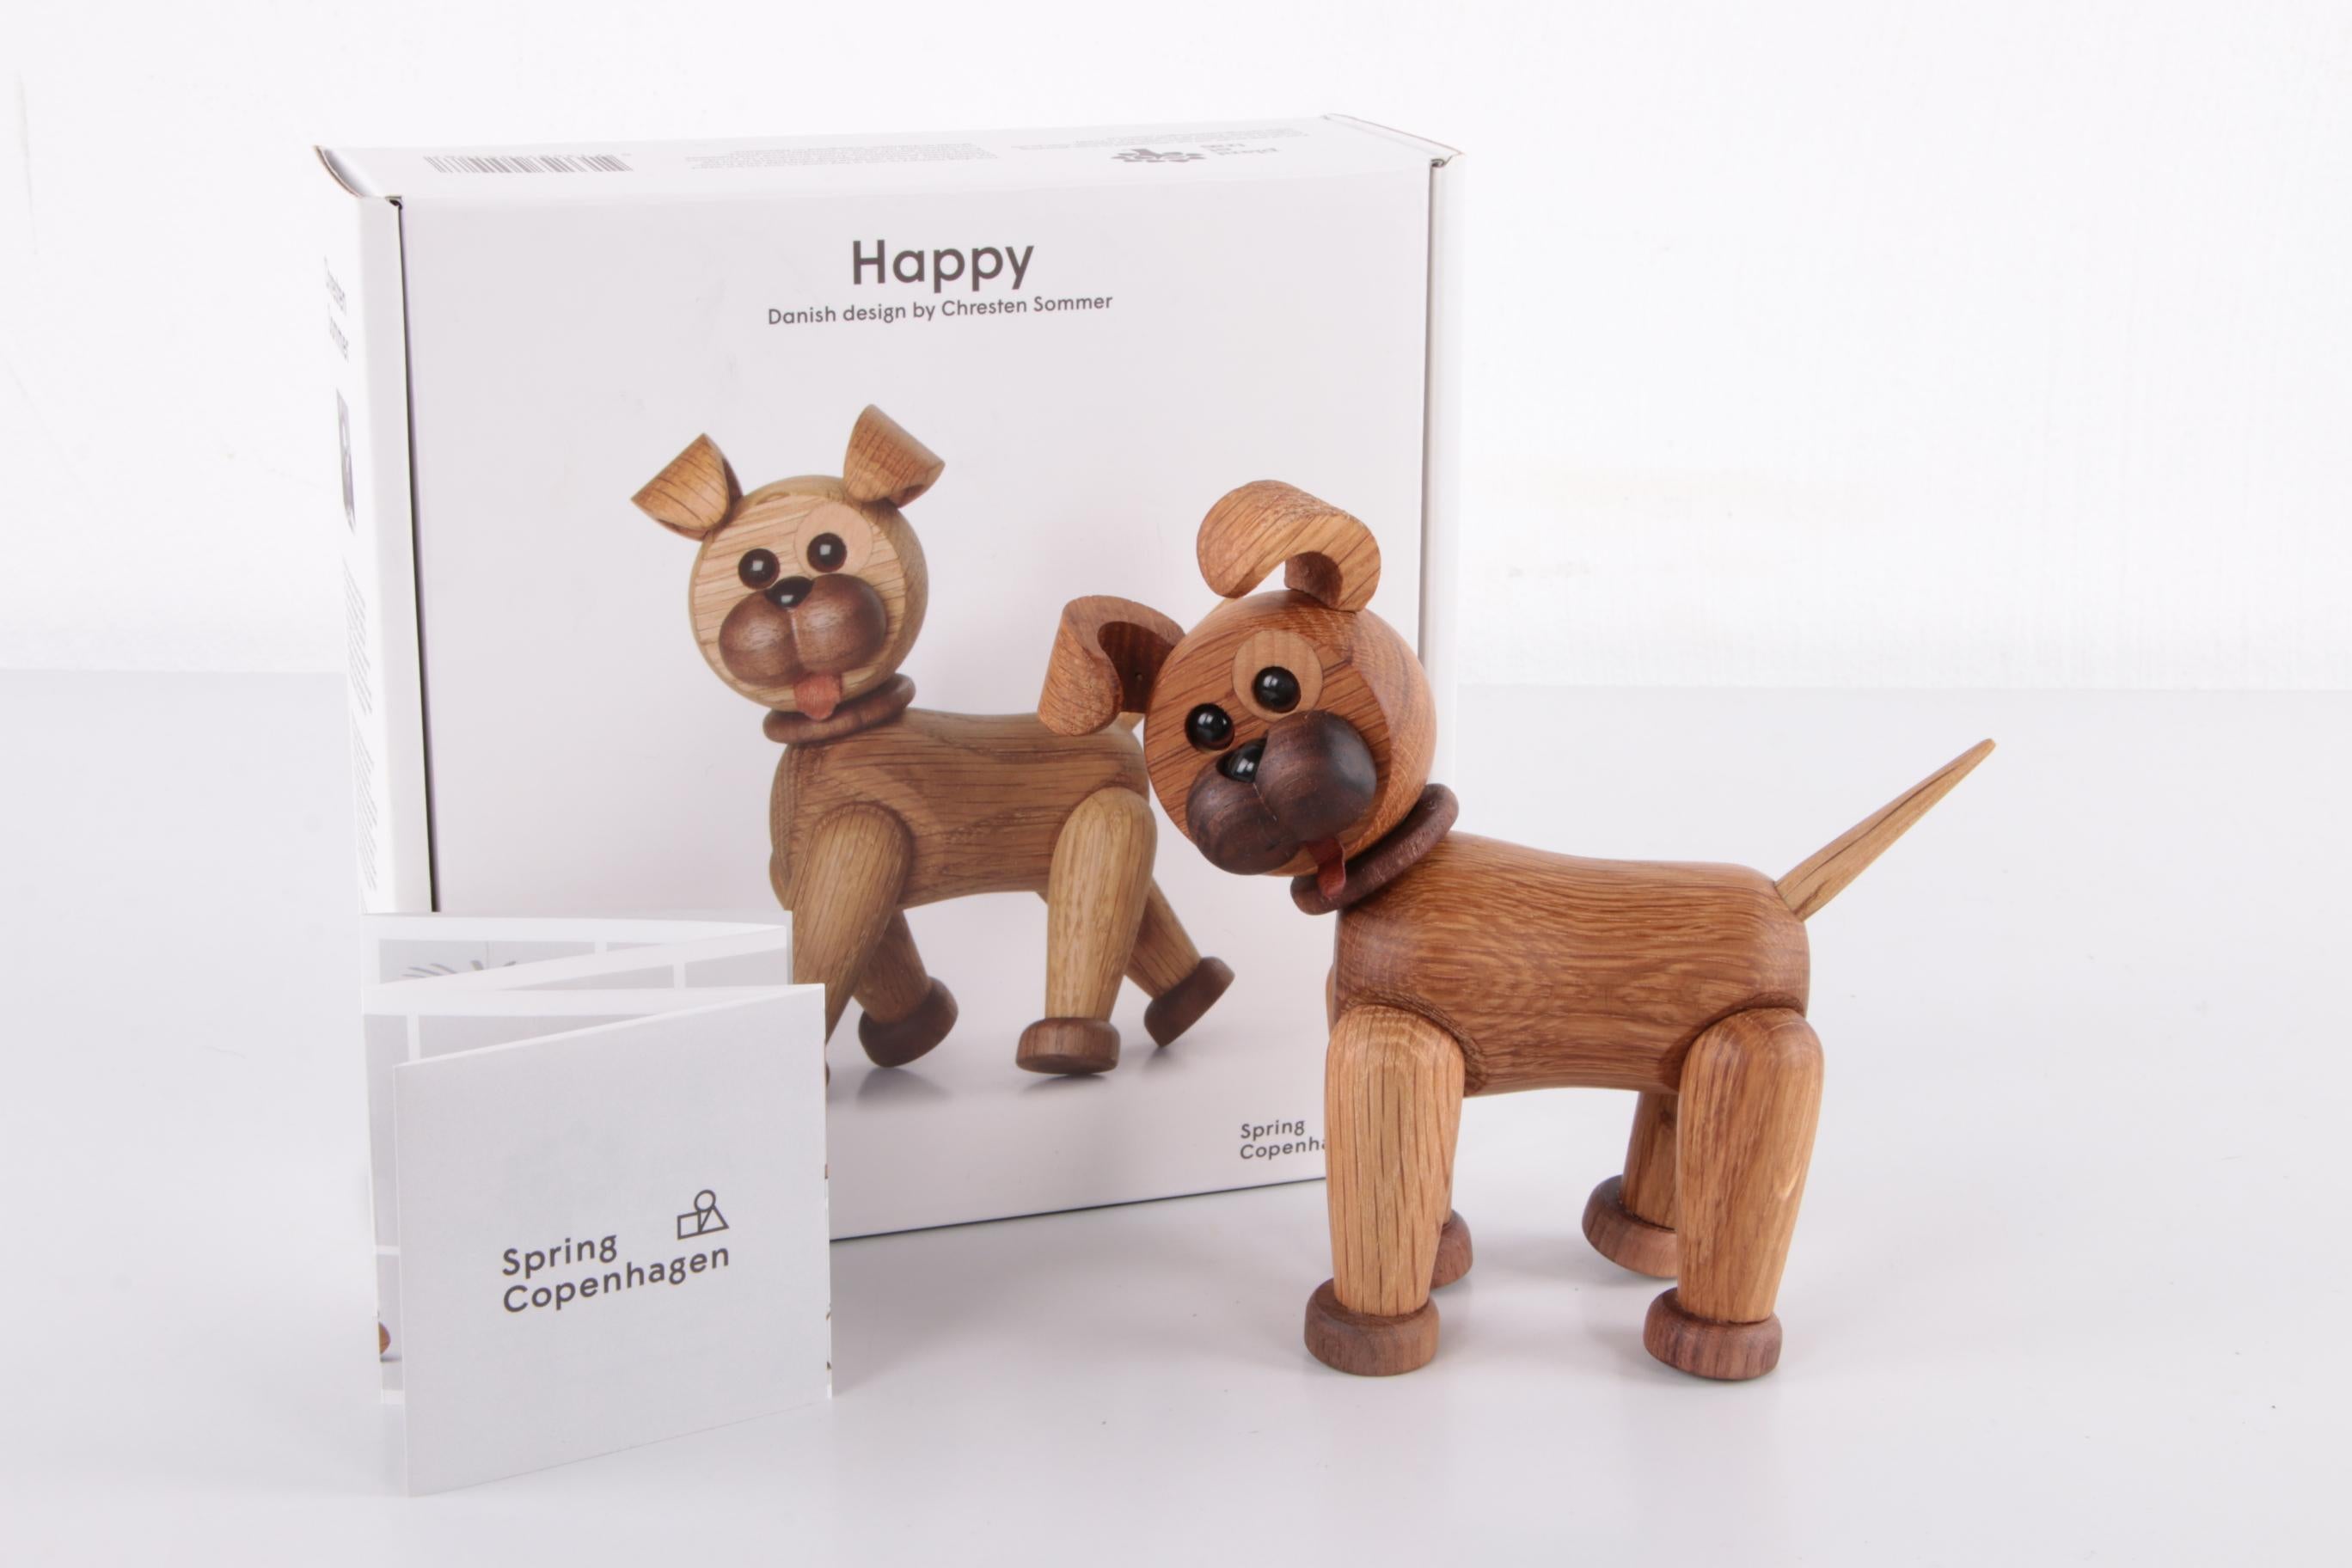 Cheerful wooden dog by Chresten Sommer for Spring Copenhagen Denmark


Spring Copenhagen's Happy The Dog figurine is a handmade wooden dog whose cheerful appearance is a delight for any dog ??lover.

Designed by Chresten Sommer, the adorable